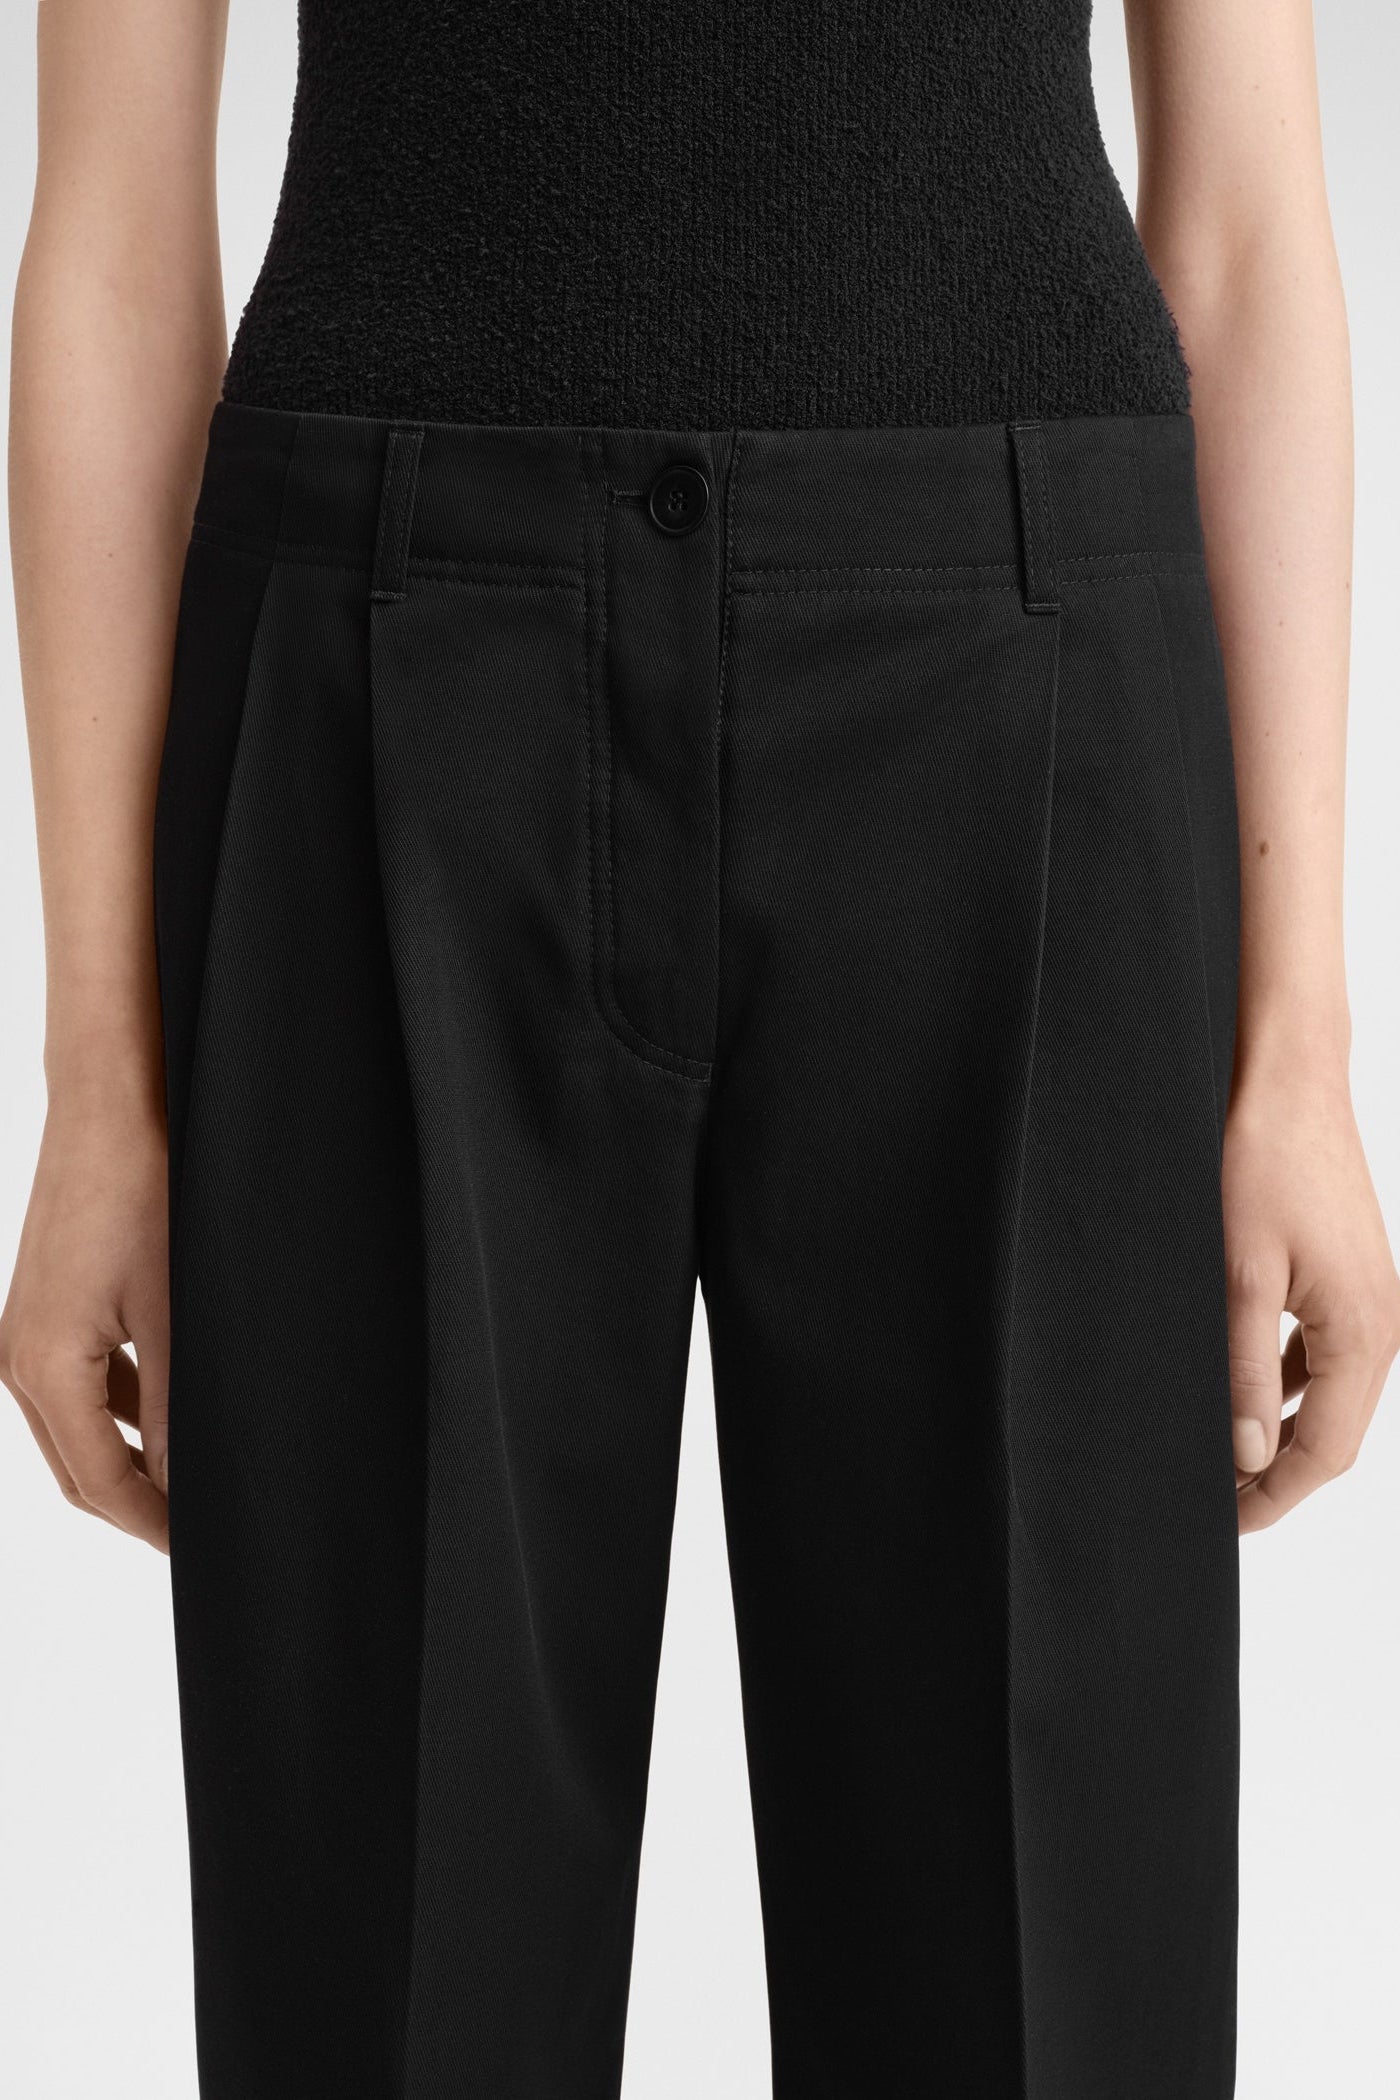 Hose Relaxed Twill in SchwarzToteme - Anita Hass